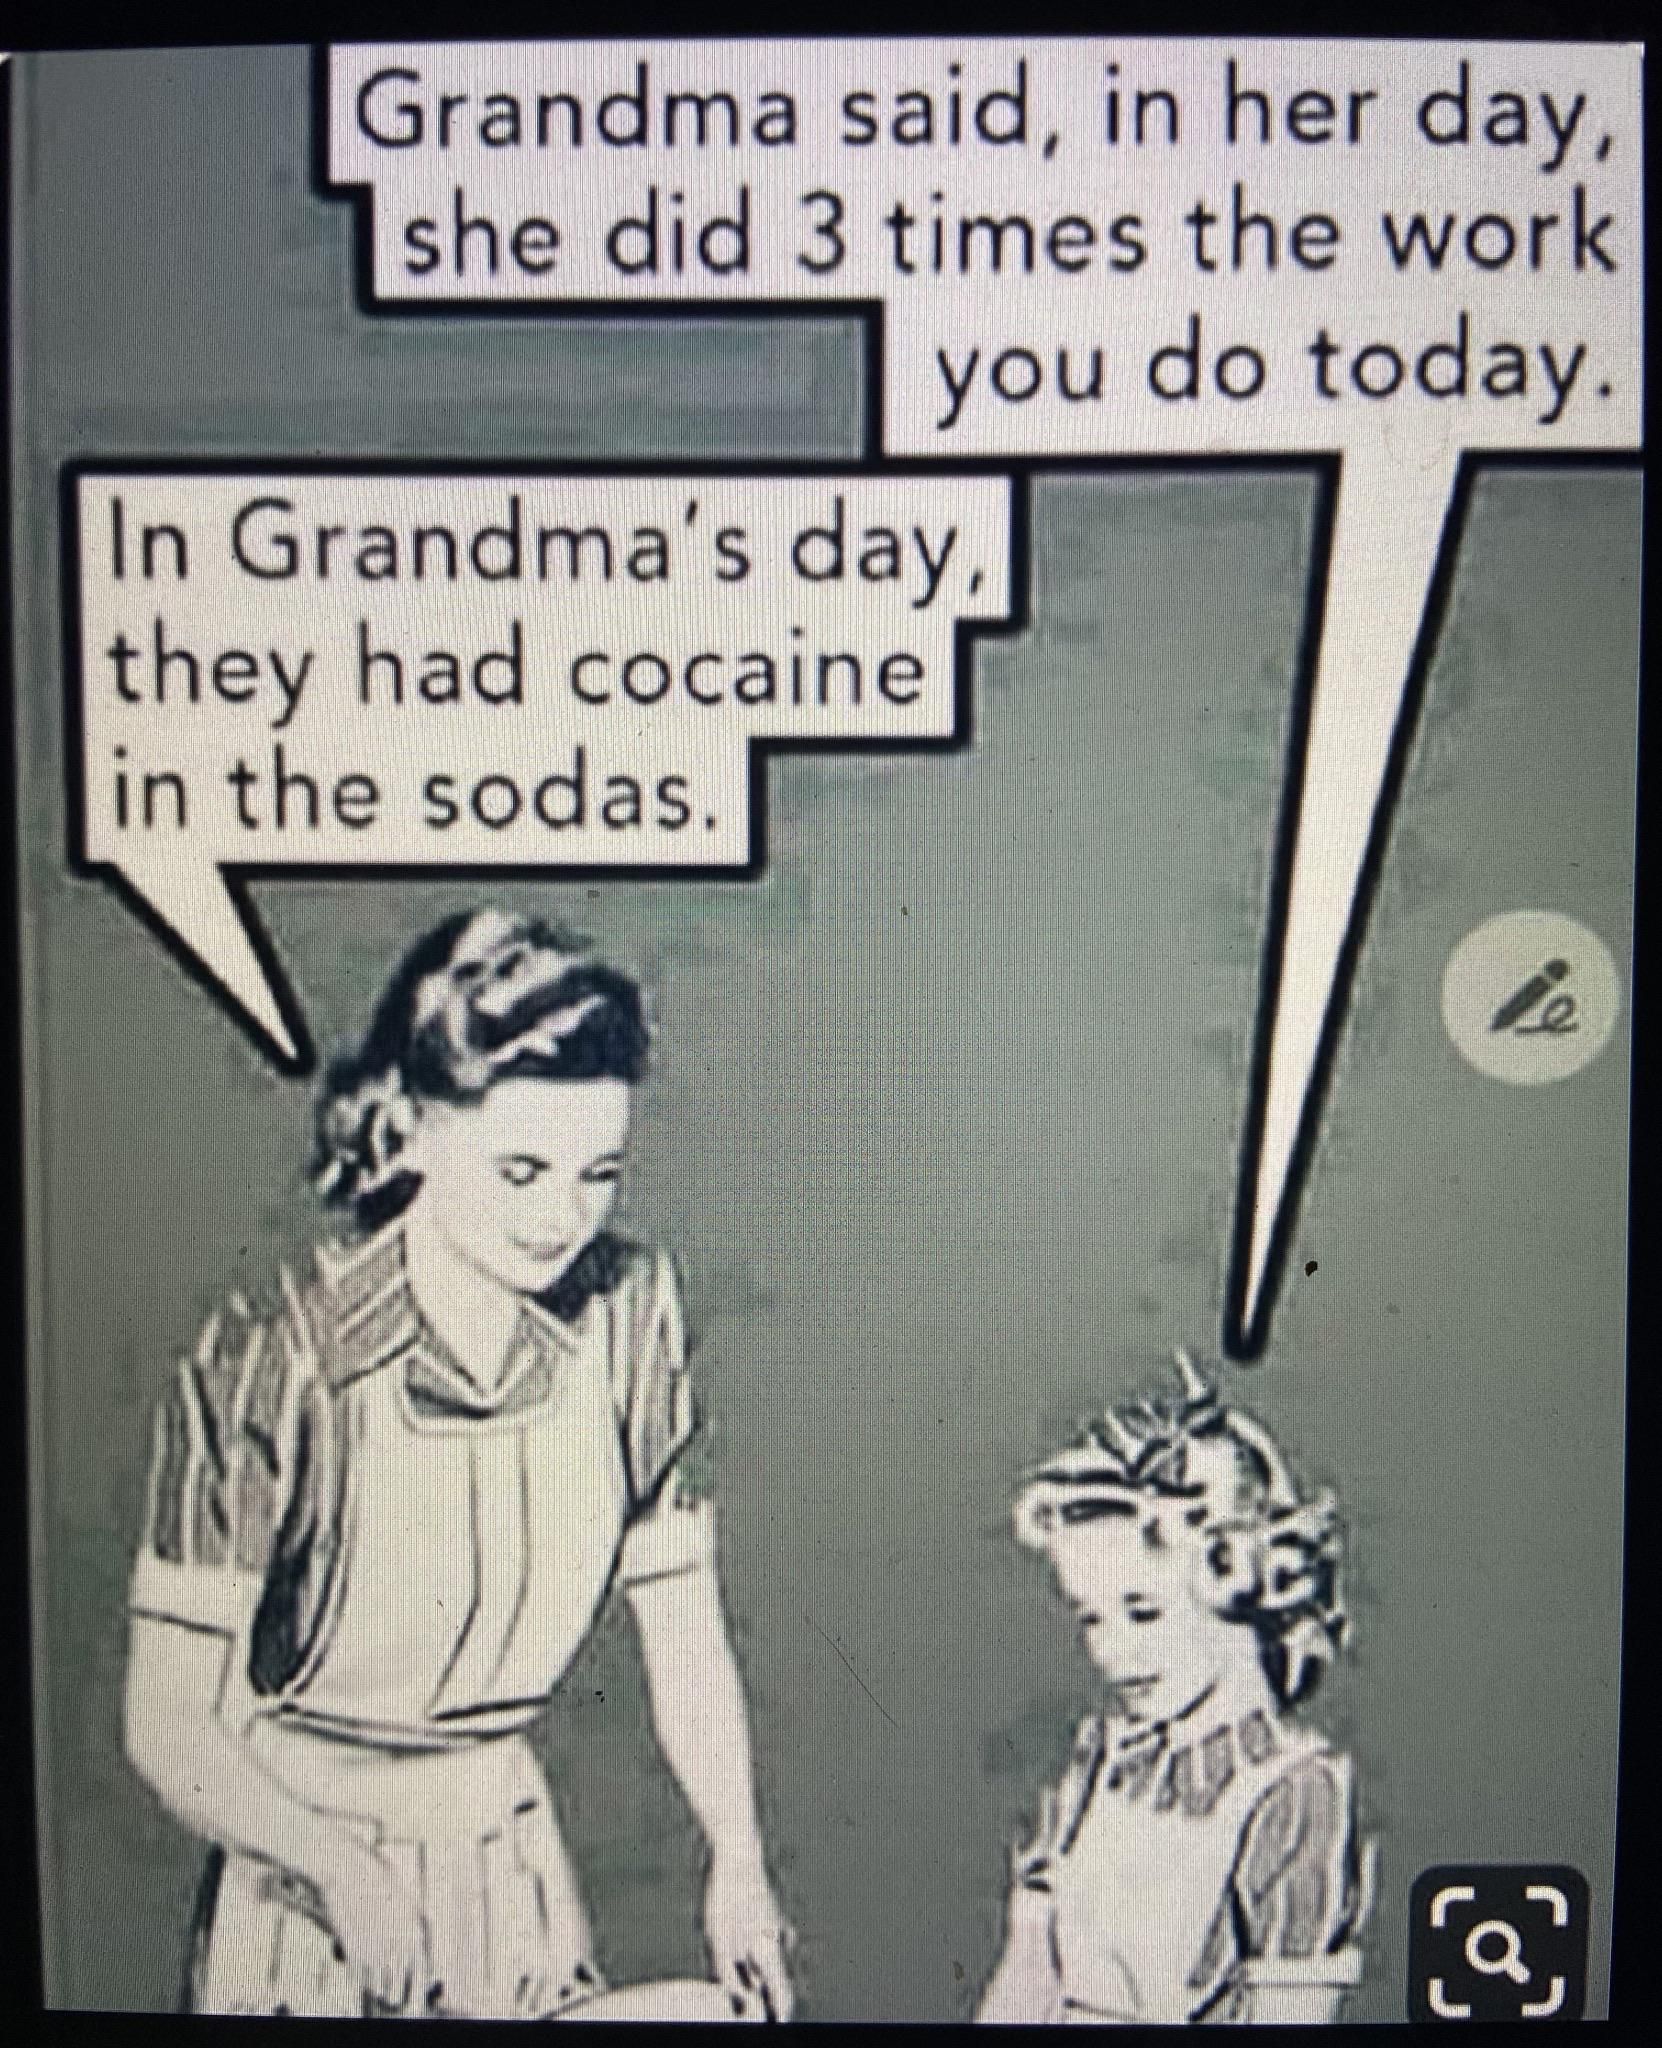 In grandmas day, it wasn’t for “partying”